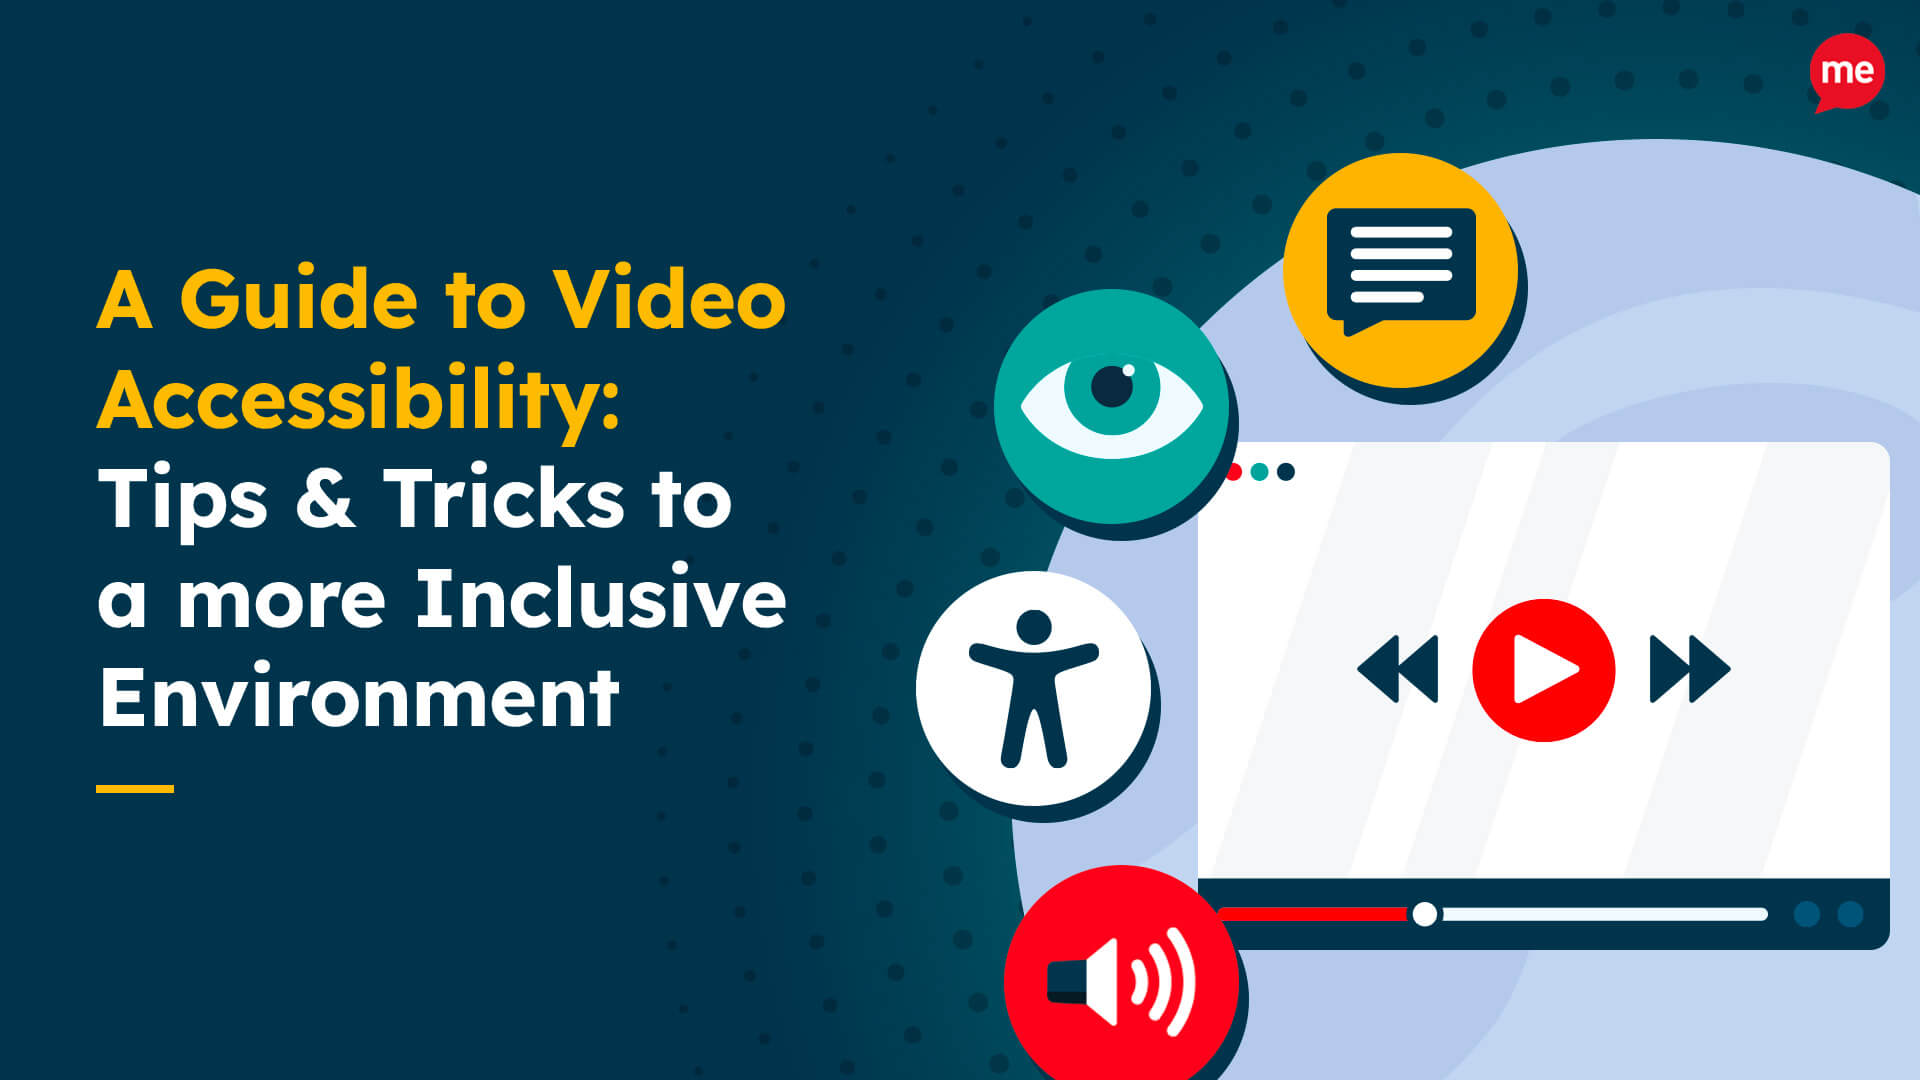 A Guide to Video Accessibility